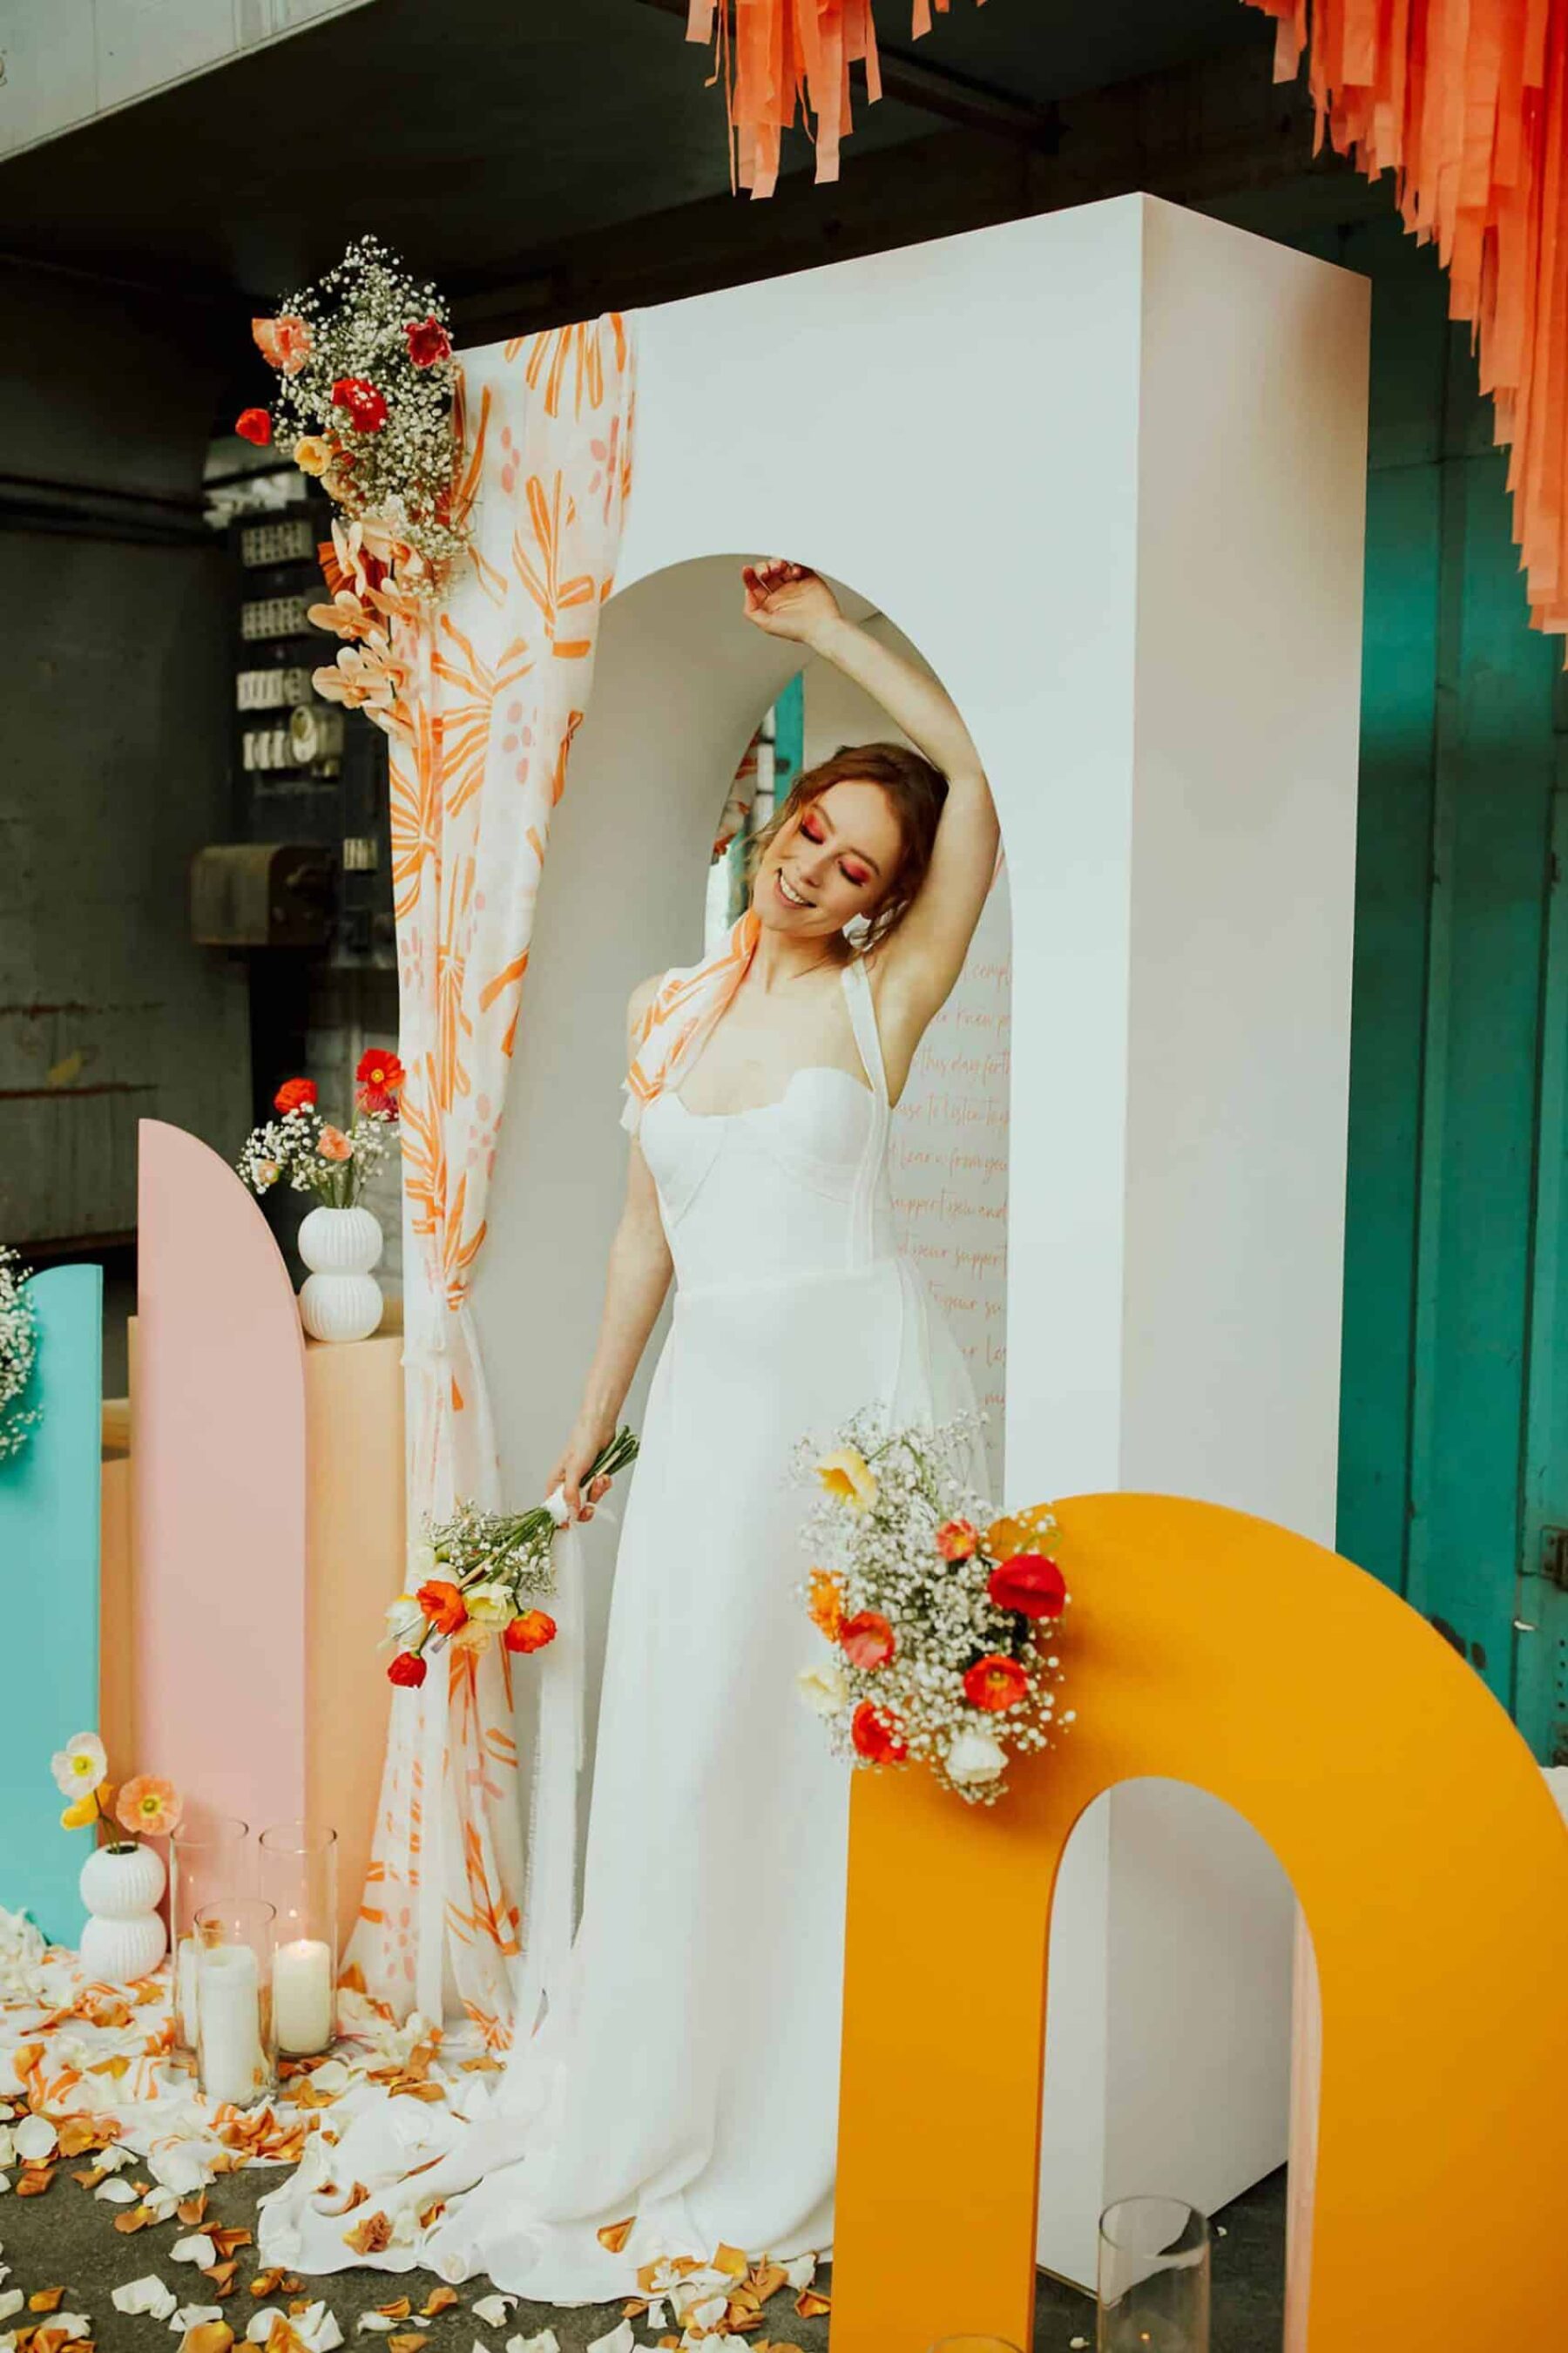 Matisse-inspired wedding inspiration at The Button Factory in Melbourne